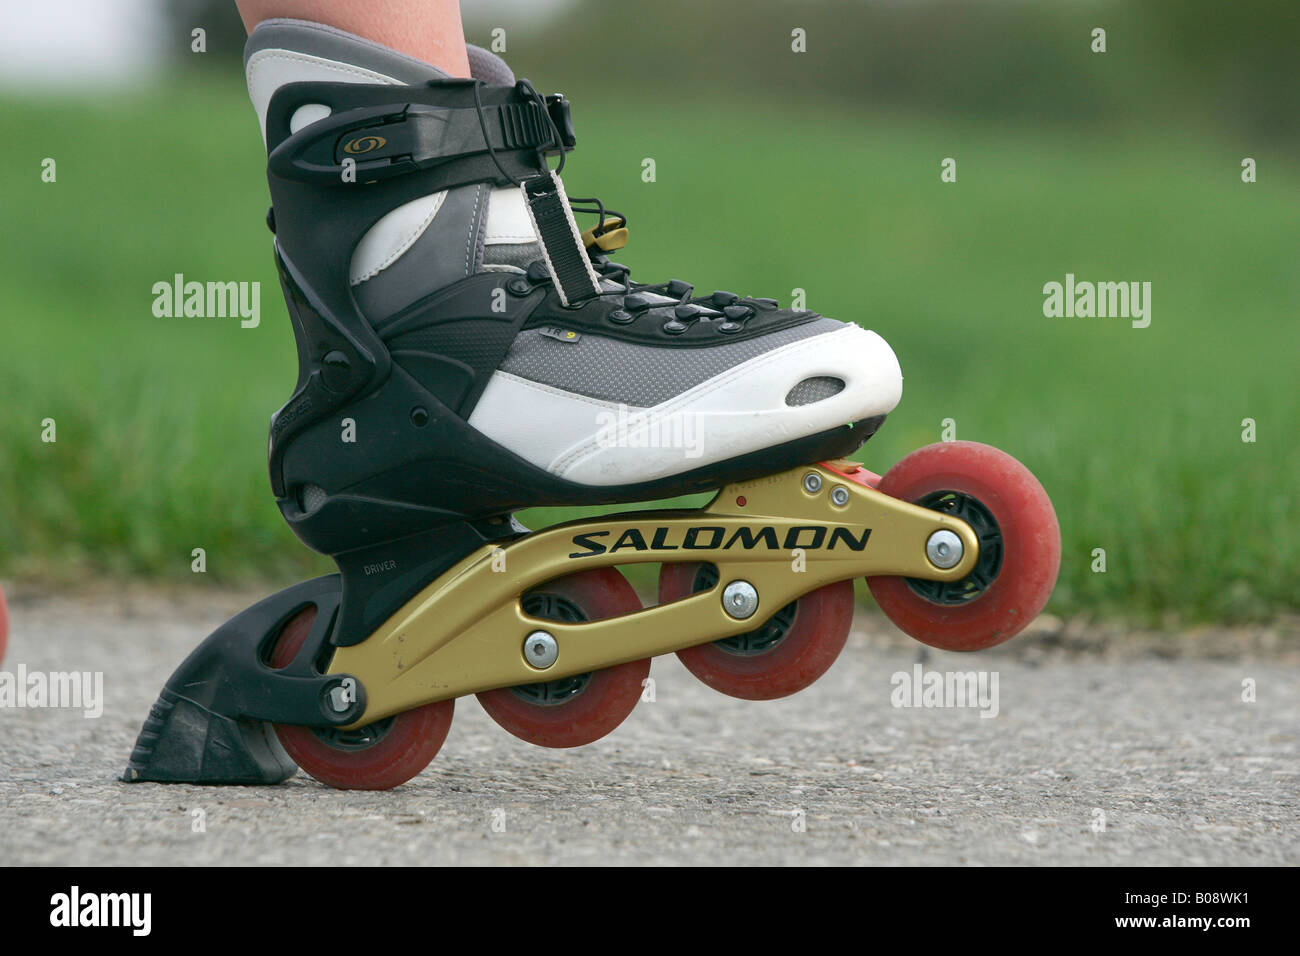 Inline skate with Softboot in brake position Stock Photo - Alamy